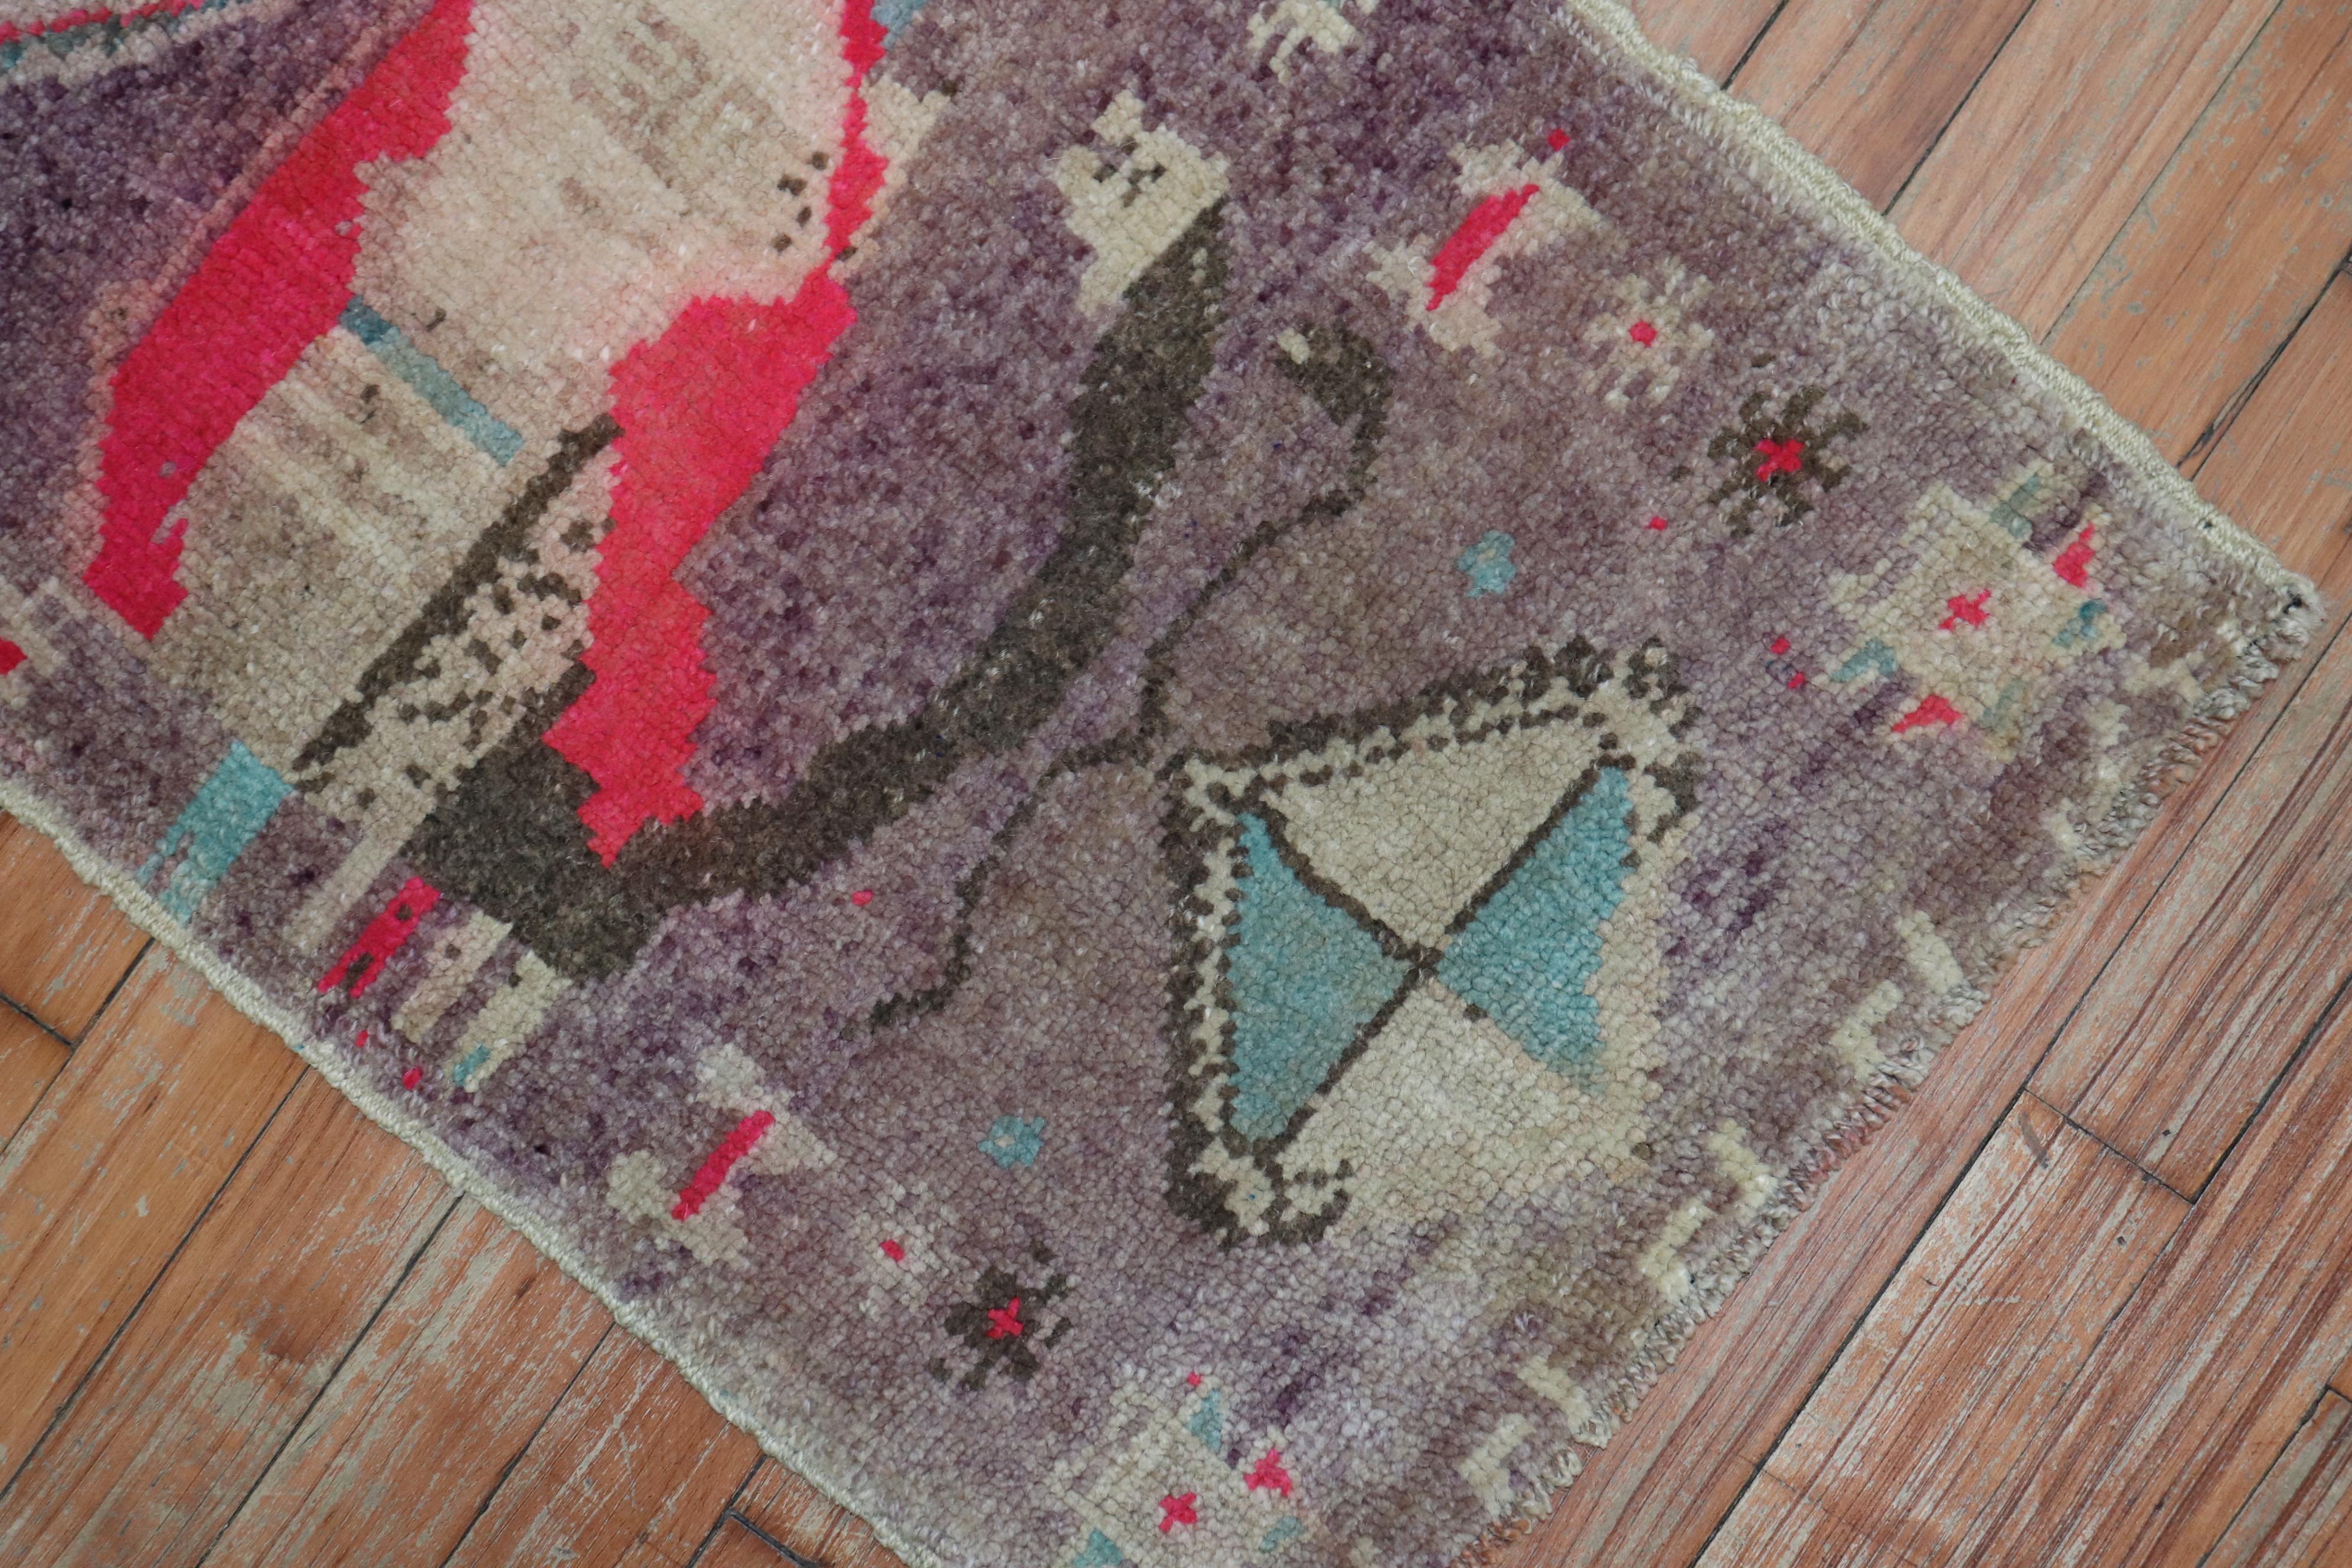 Mid-20th century anatolian mat with a peculiar facial motif on a lavender field.

Measures: 1'7